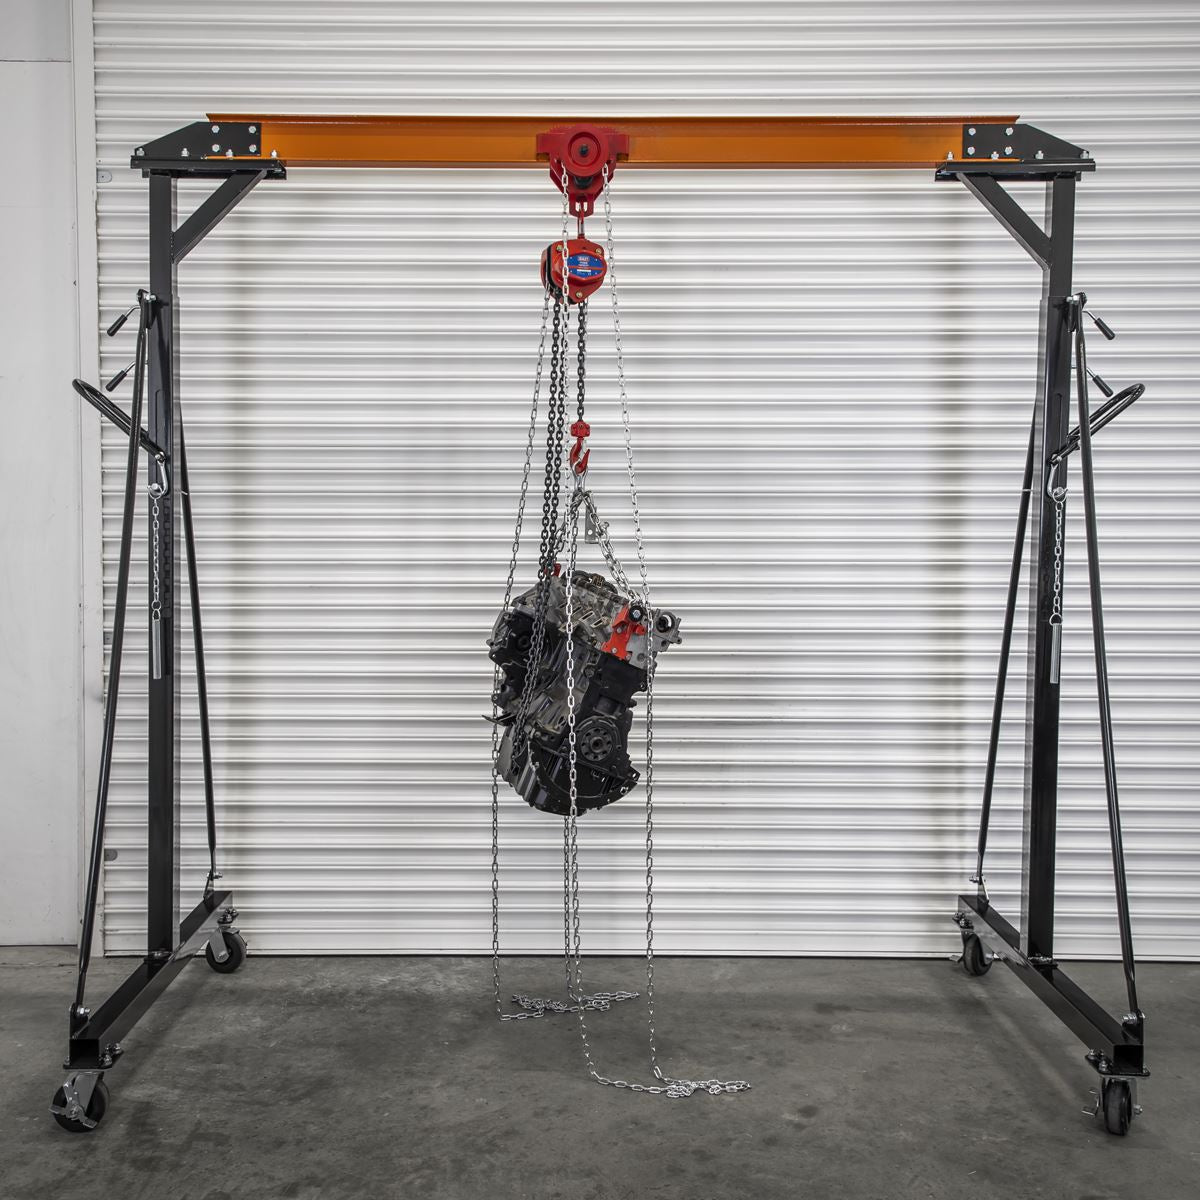 Sealey Portable Gantry Crane Adjustable 1 Tonne with Geared Trolley Combo